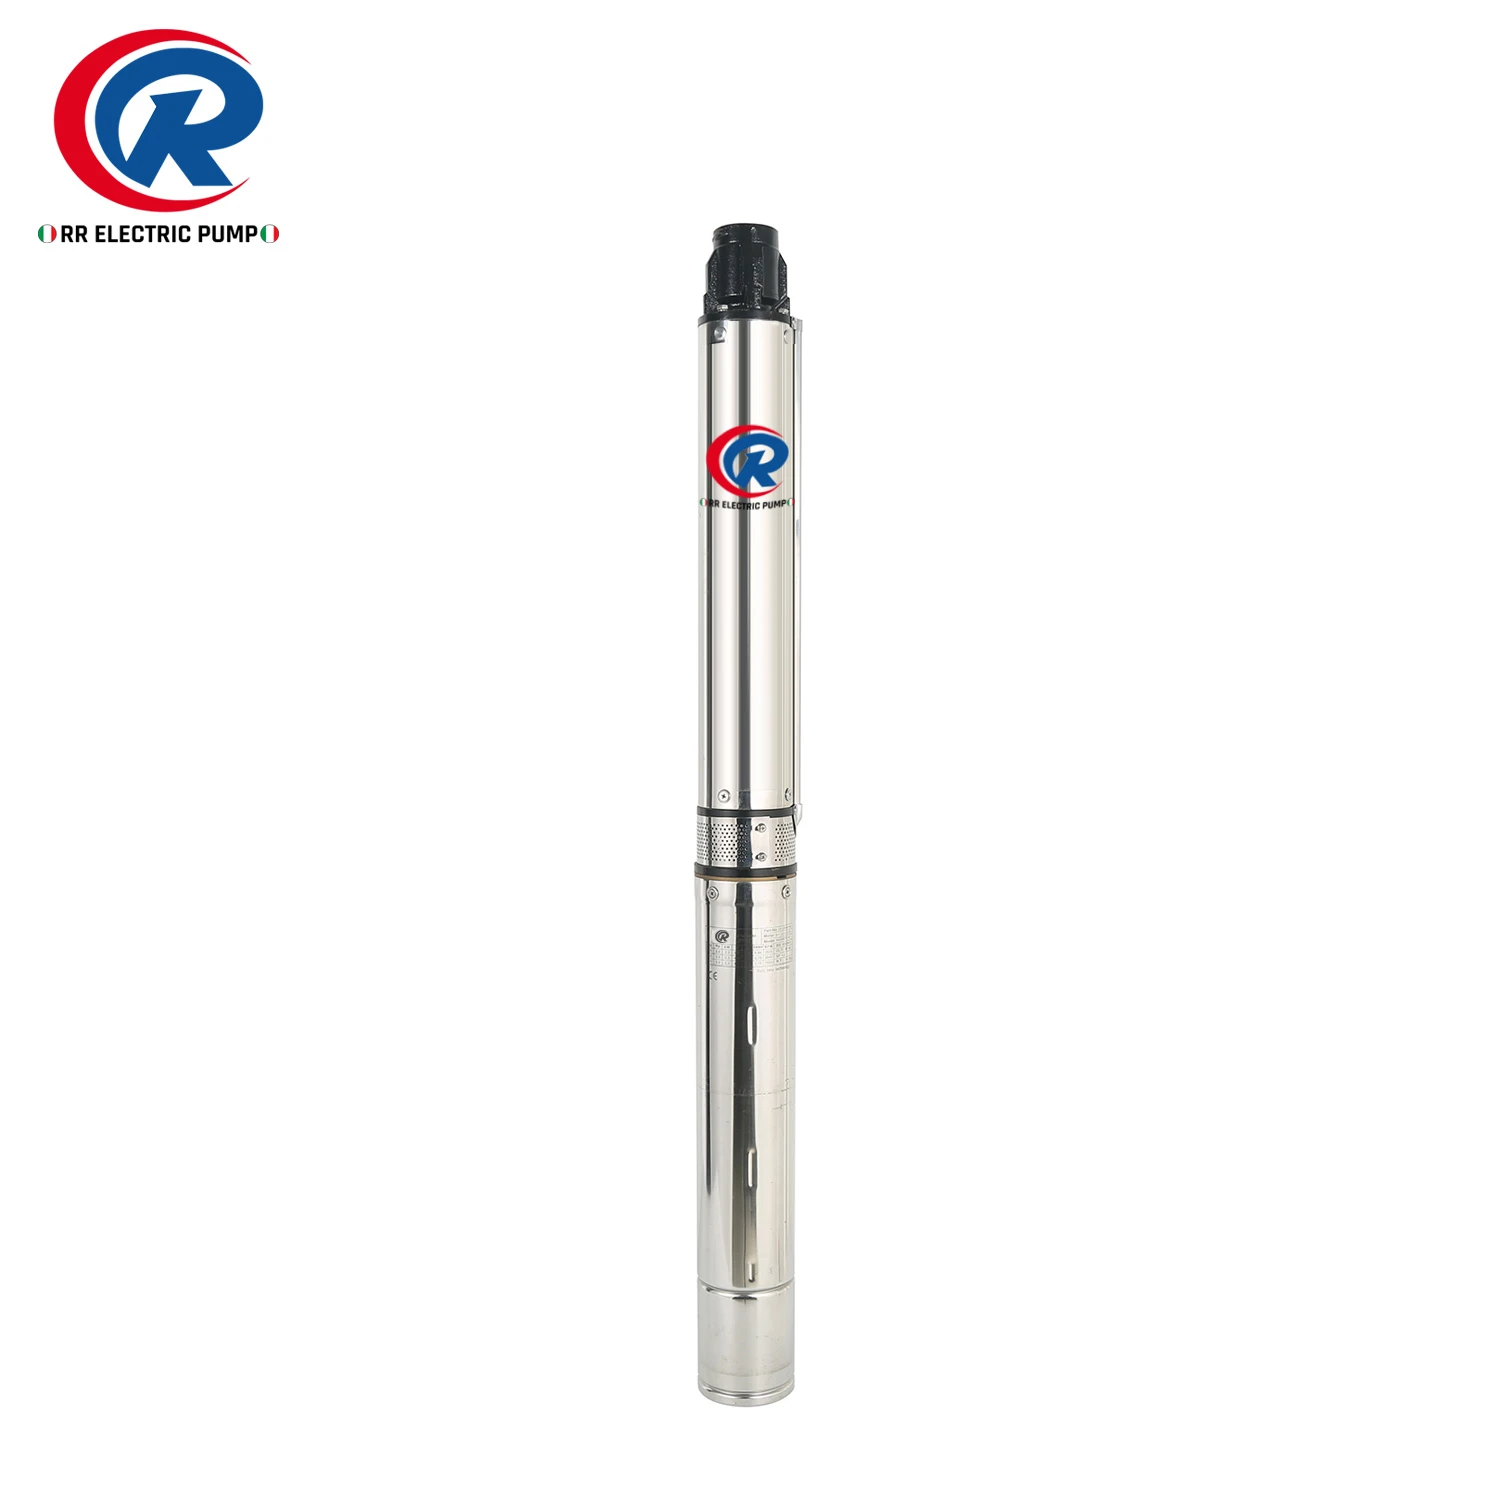 Mastra ruirong 4 inch 3hp 2.2kW submersible borehole pump stainless steel pumps easy disassembly deep well submersible pump